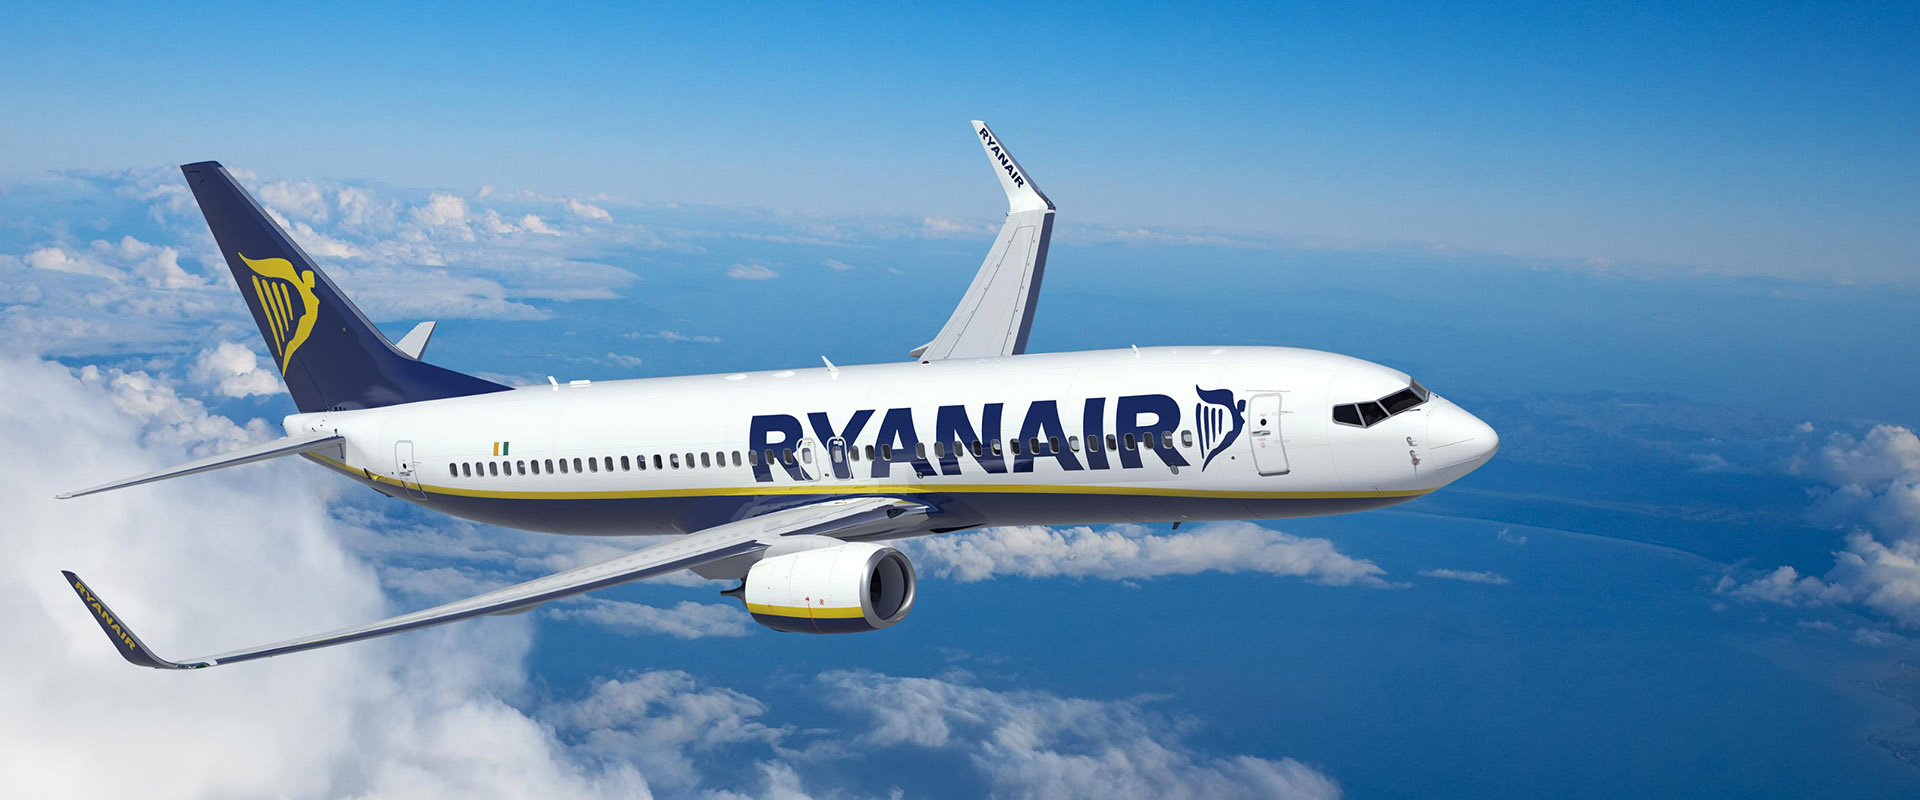 Ryanair Launches 6 New Routes In London Southend For Summer 2020